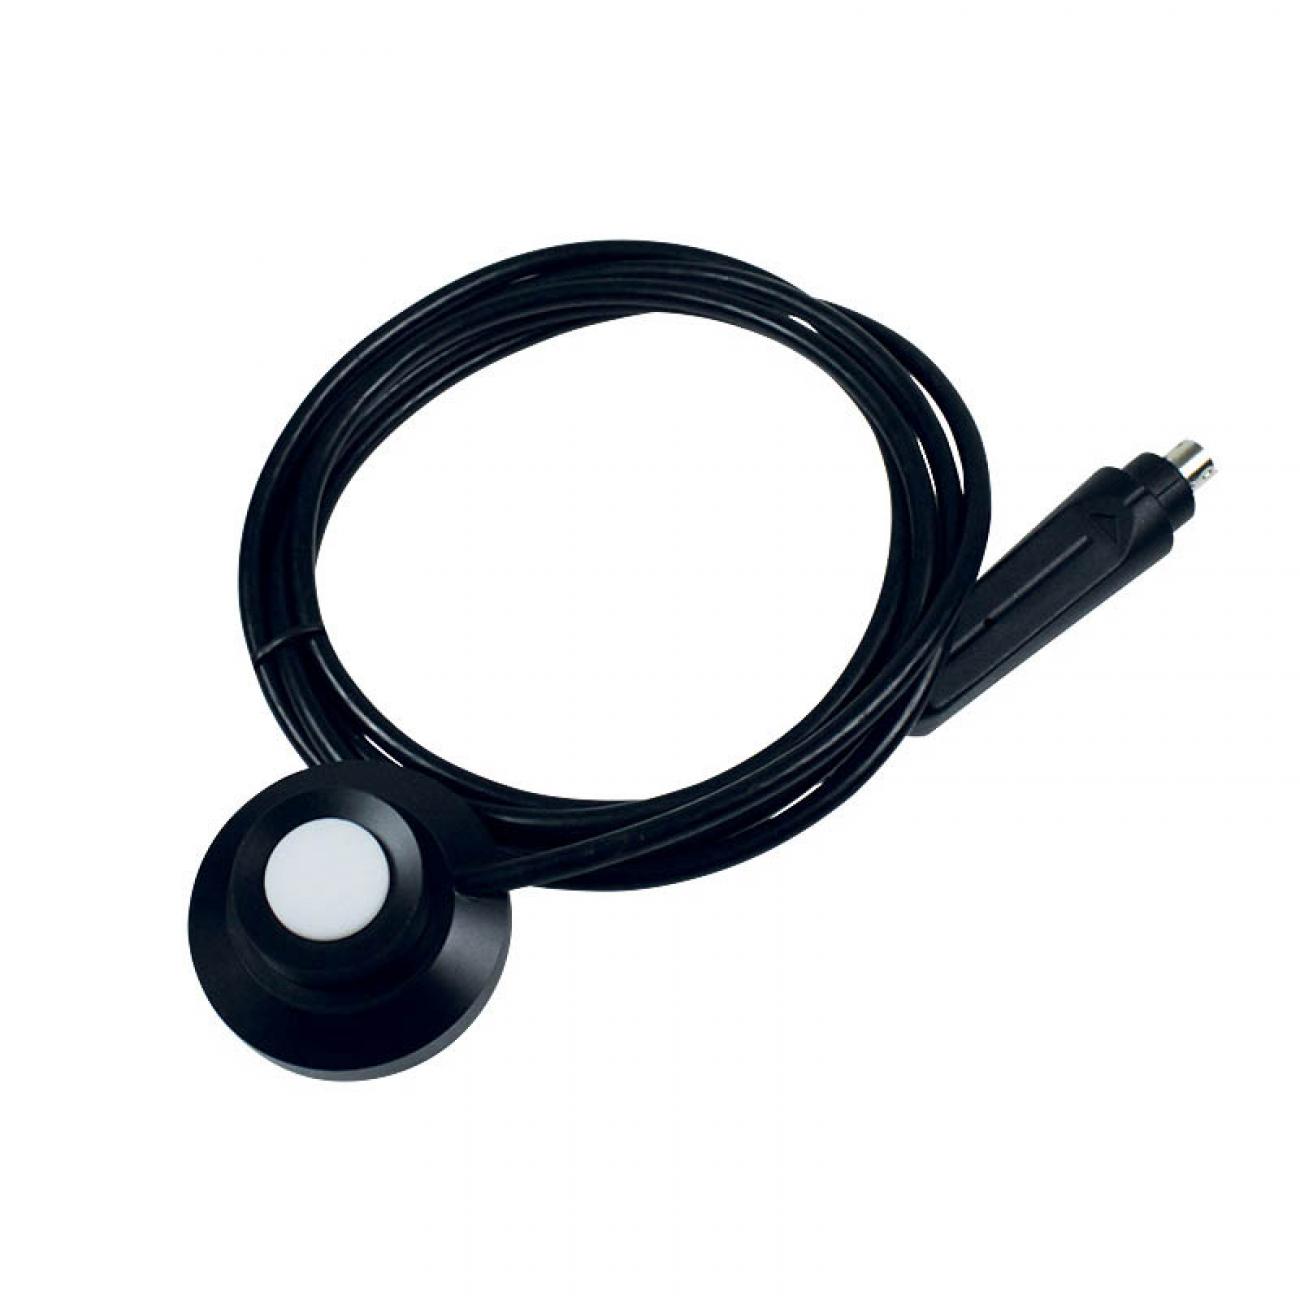 Light probe For class 210 / 310 multi-function portables